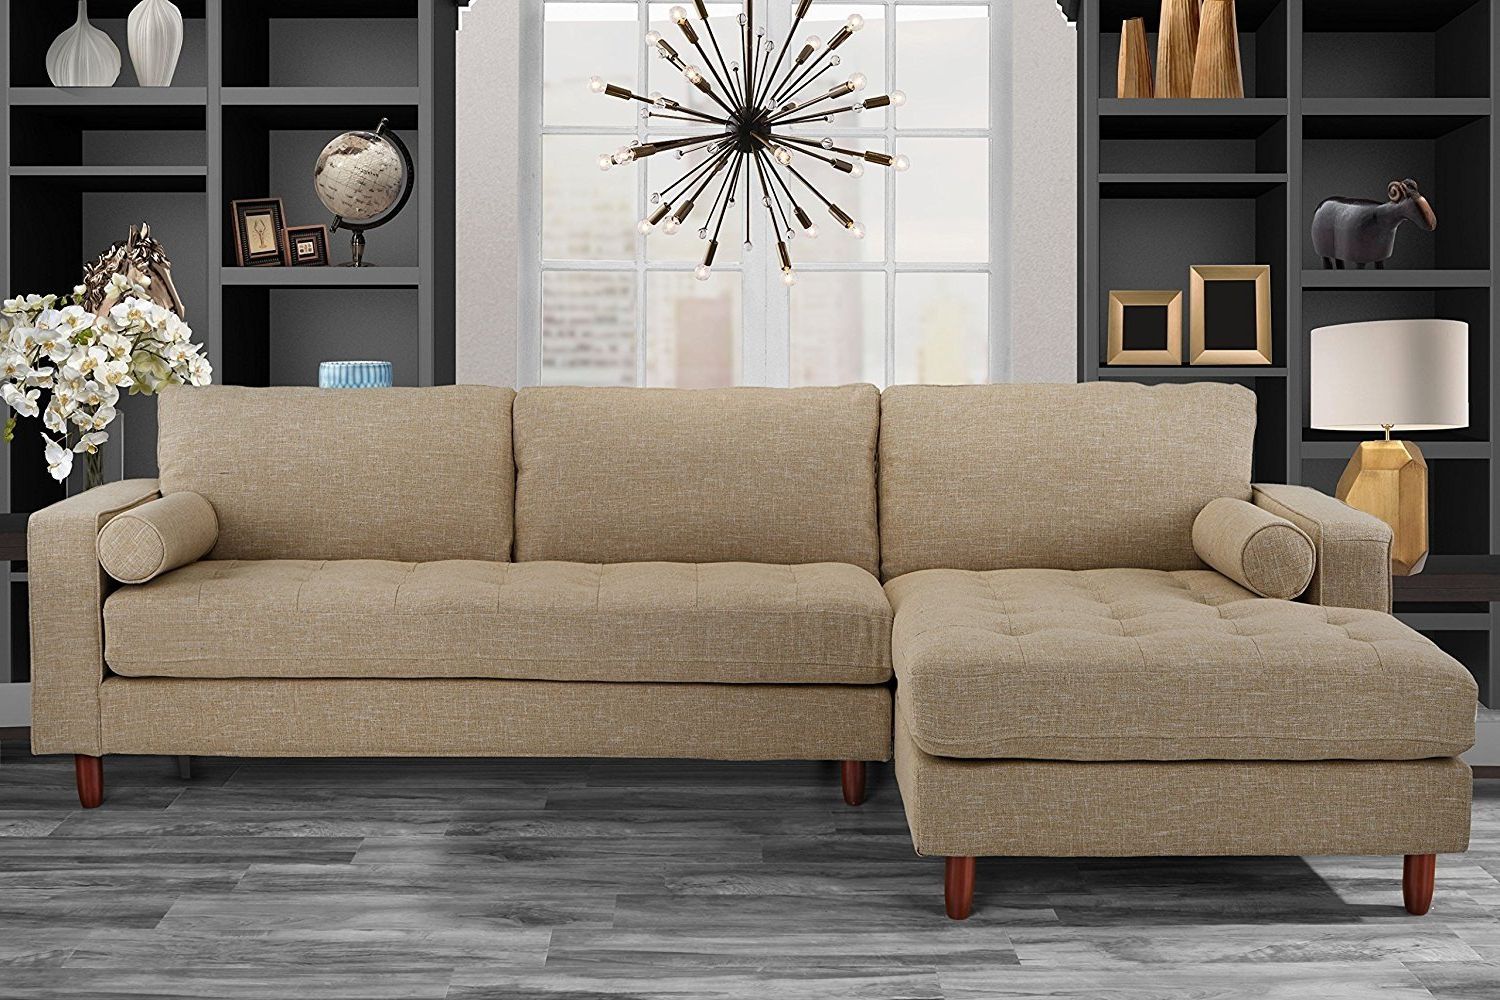 Mid Century Modern Tufted Fabric Sectional Sofa, L Shape Couch Beige Regarding Well Known Modern L Shaped Sofa Sectionals (View 15 of 15)